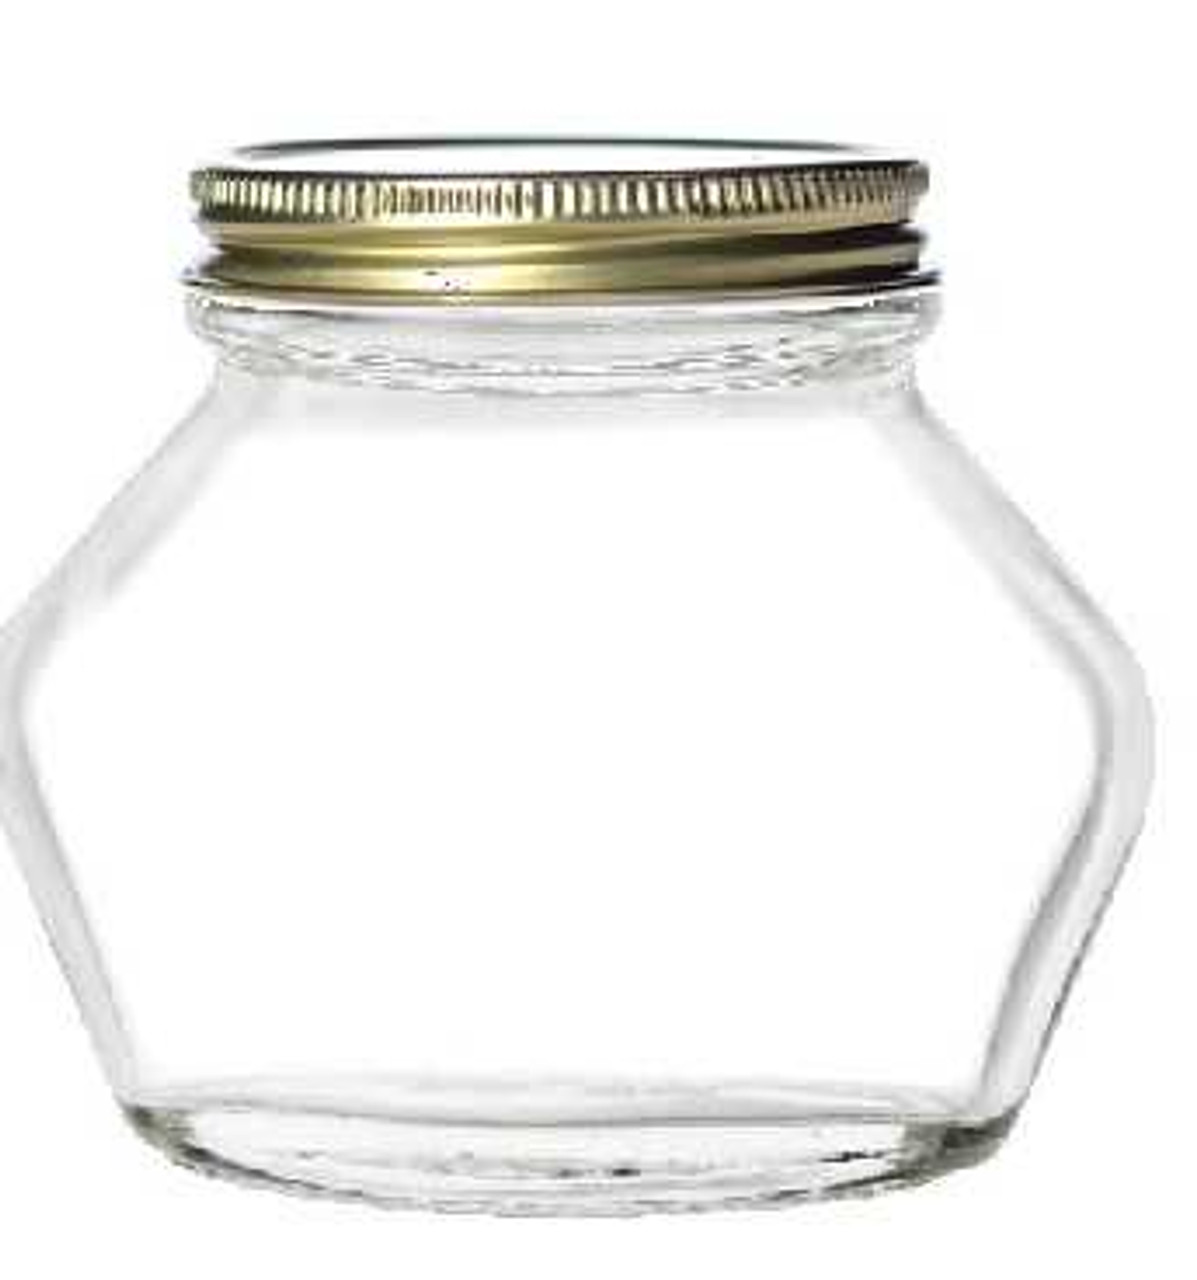 https://cdn11.bigcommerce.com/s-1ybtx/images/stencil/1280x1280/products/1220/6570/Perfectly-Unperfect-lids-2-oz-Elephant-Glass-Jars-with-Gold-Lids_3940__32749.1674335592.jpg?c=2?imbypass=on